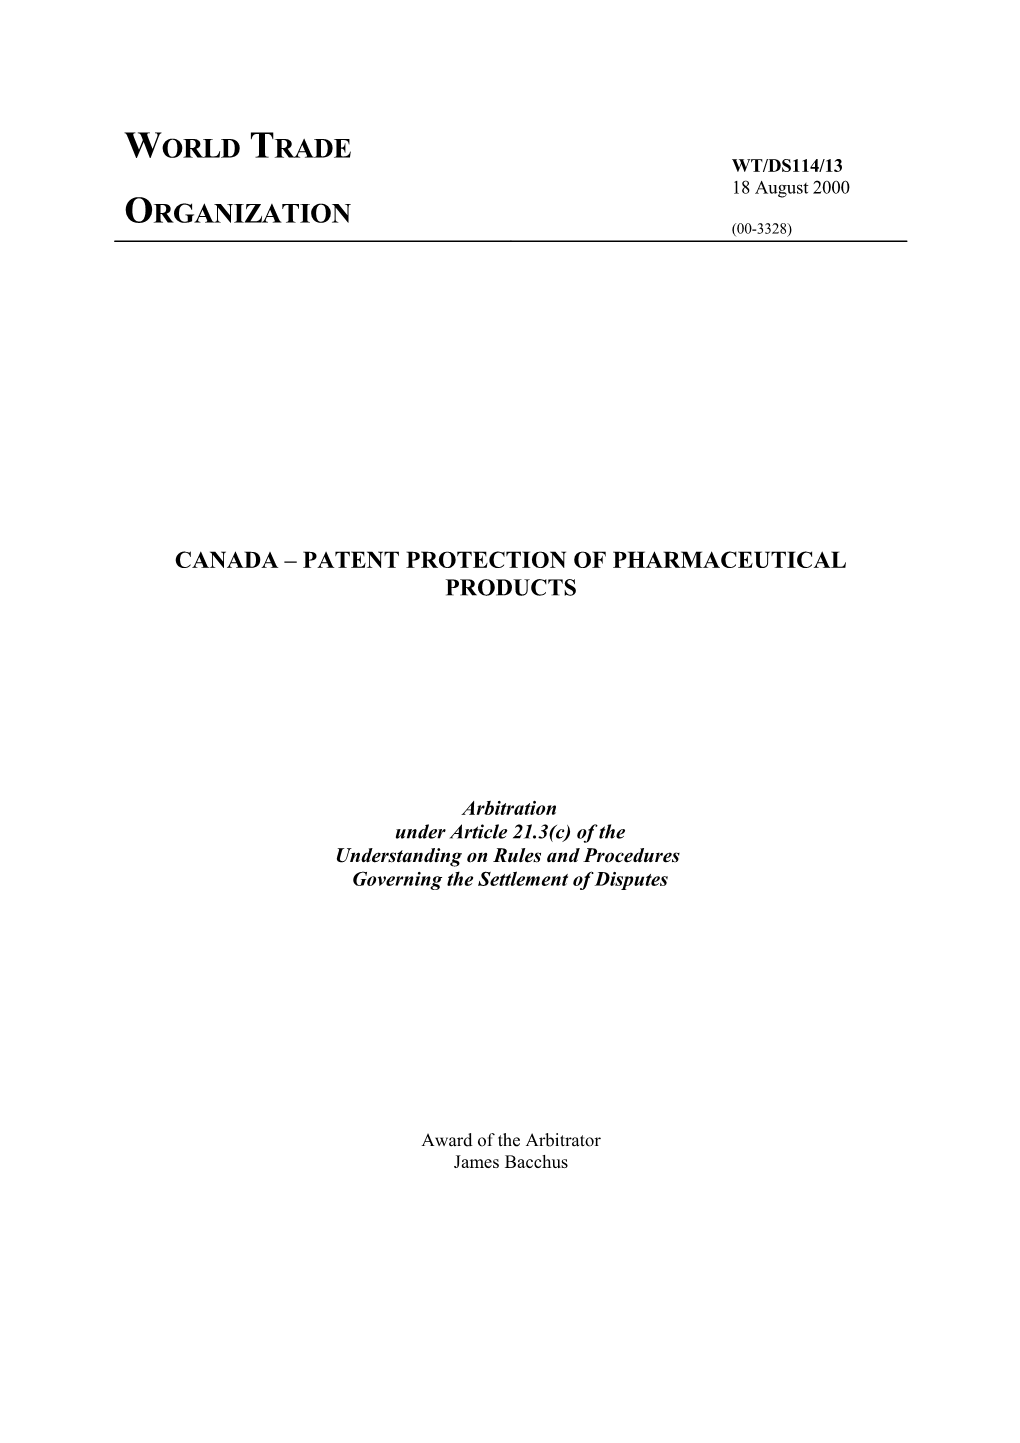 Canada Patent Protection of Pharmaceutical Products